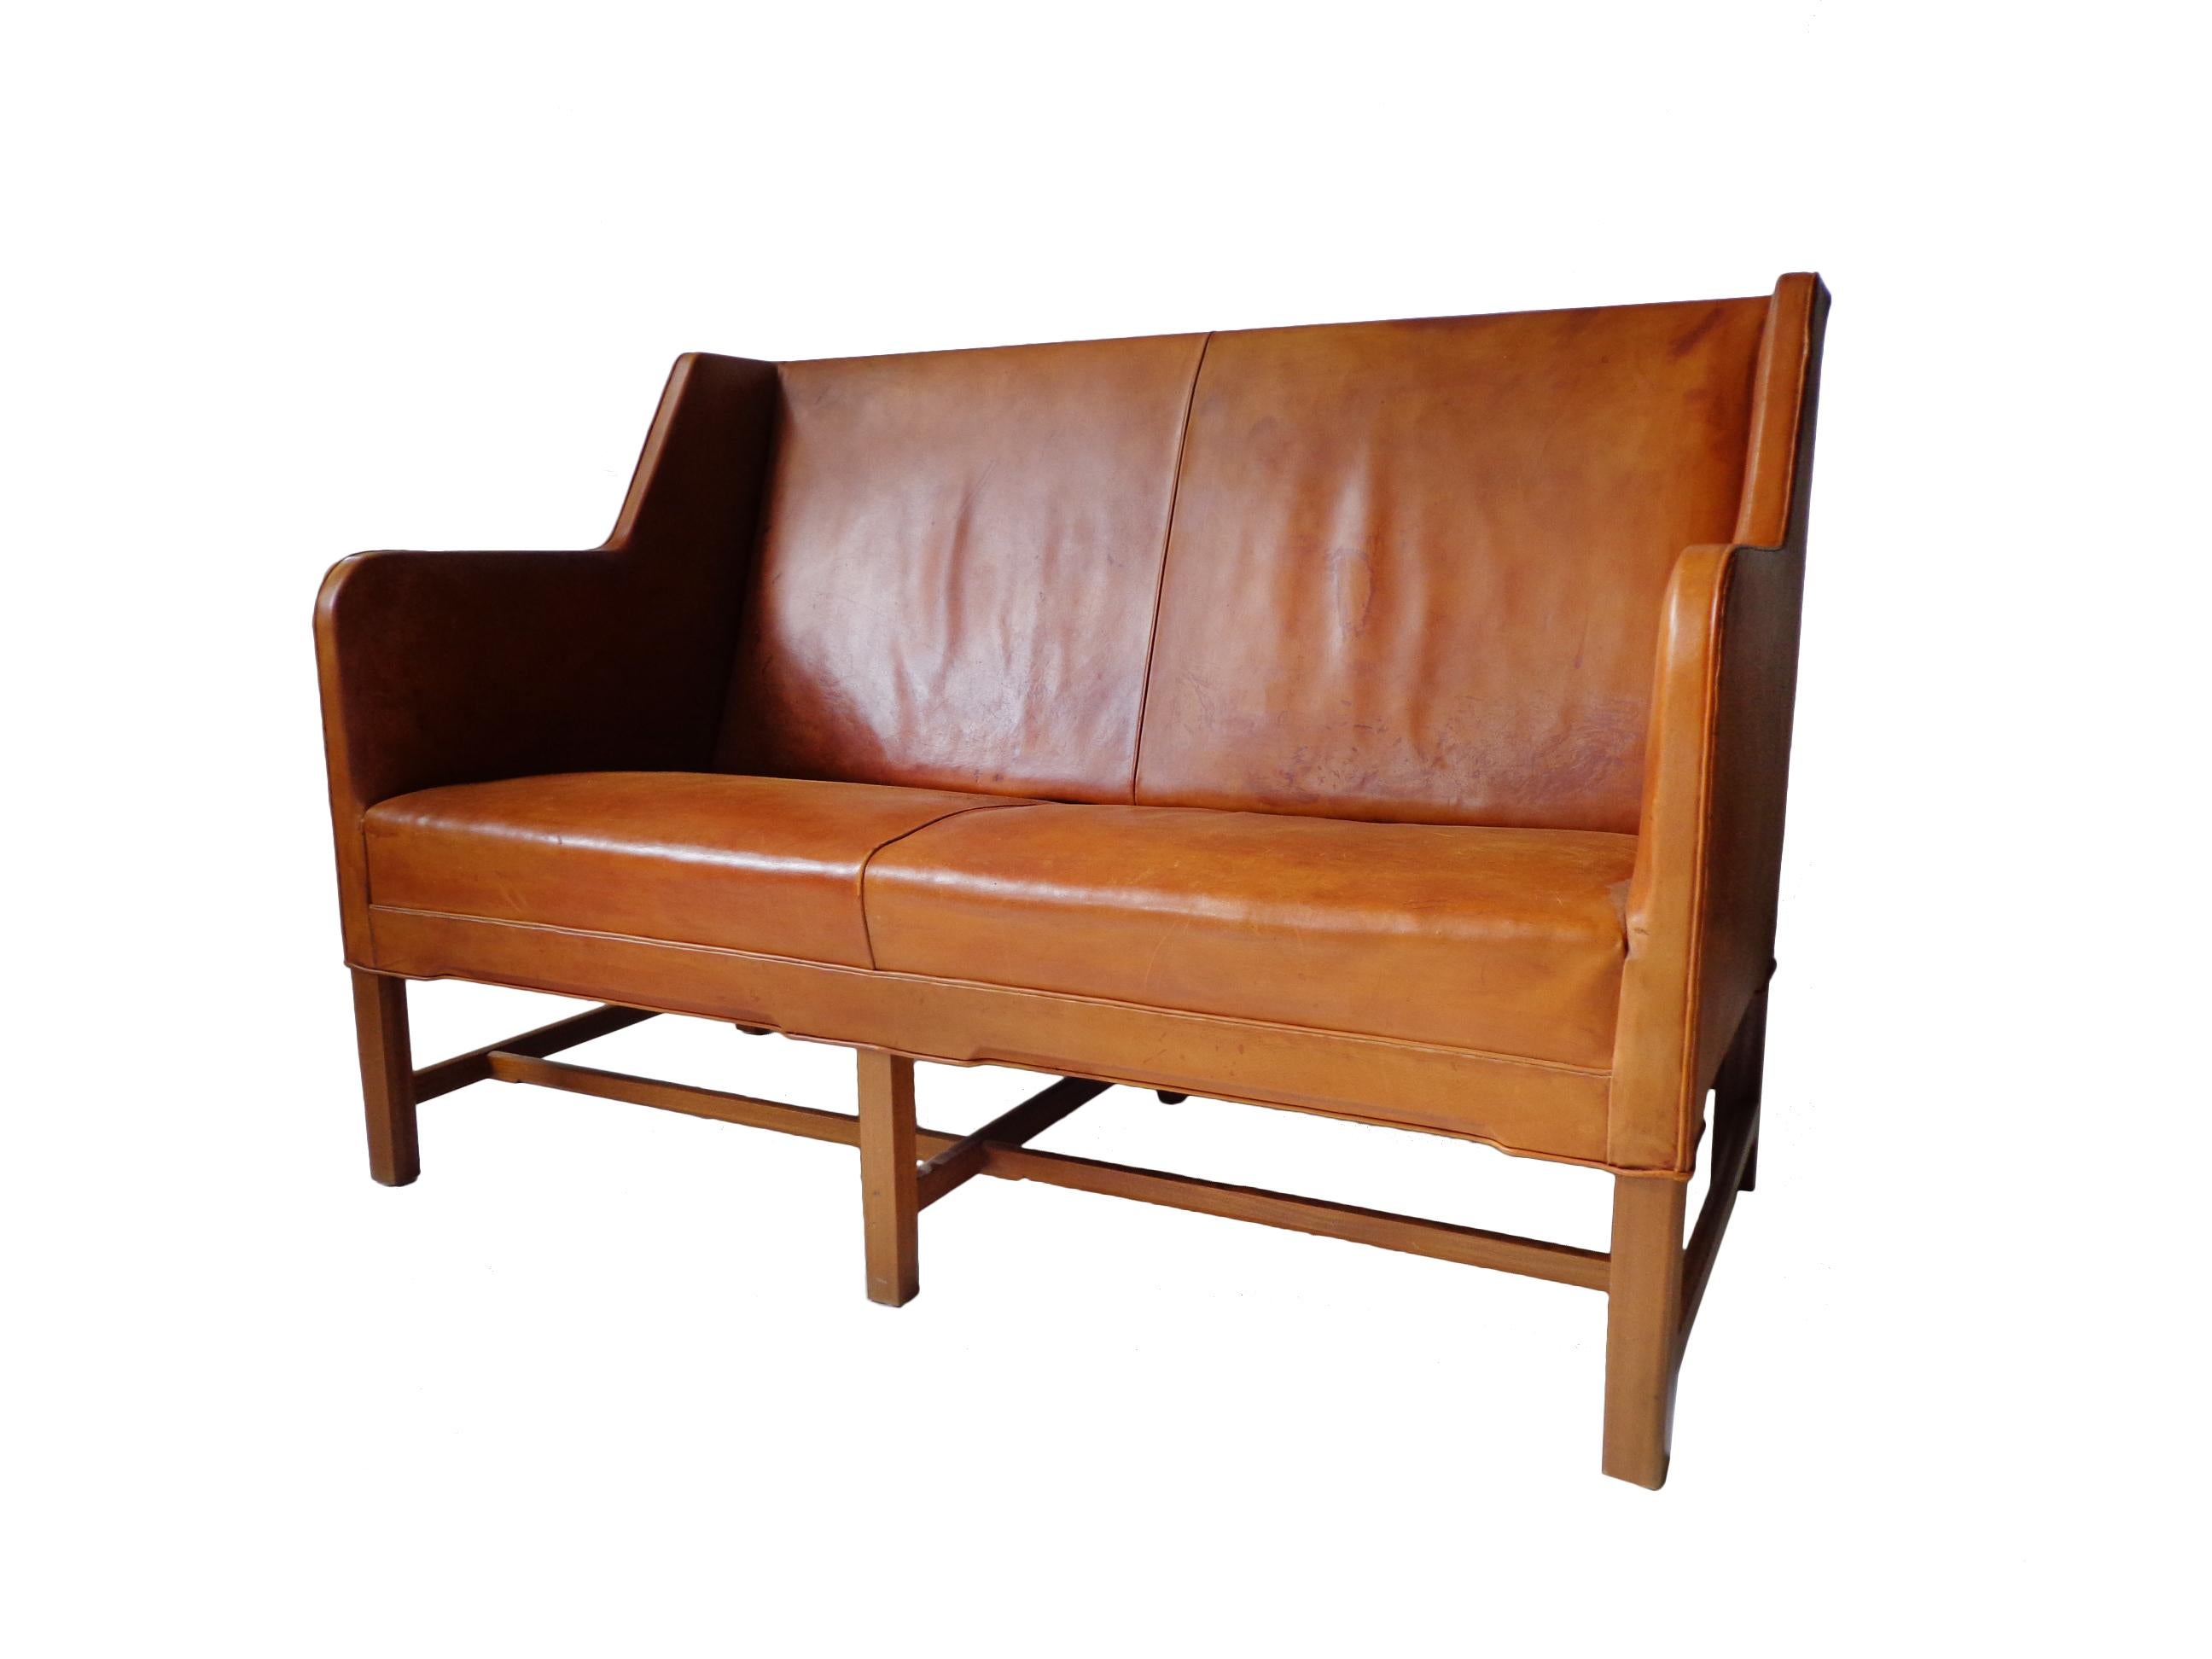 Two-seater sofa model 5011 in original cognac leather and six-legged mahogany base. Produced by Rud. Rasmussen Cabinetmakers, Denmark. Minor marks on the frame, patina to the leather. Back covered in original canvas.
Shown at the Copenhagen